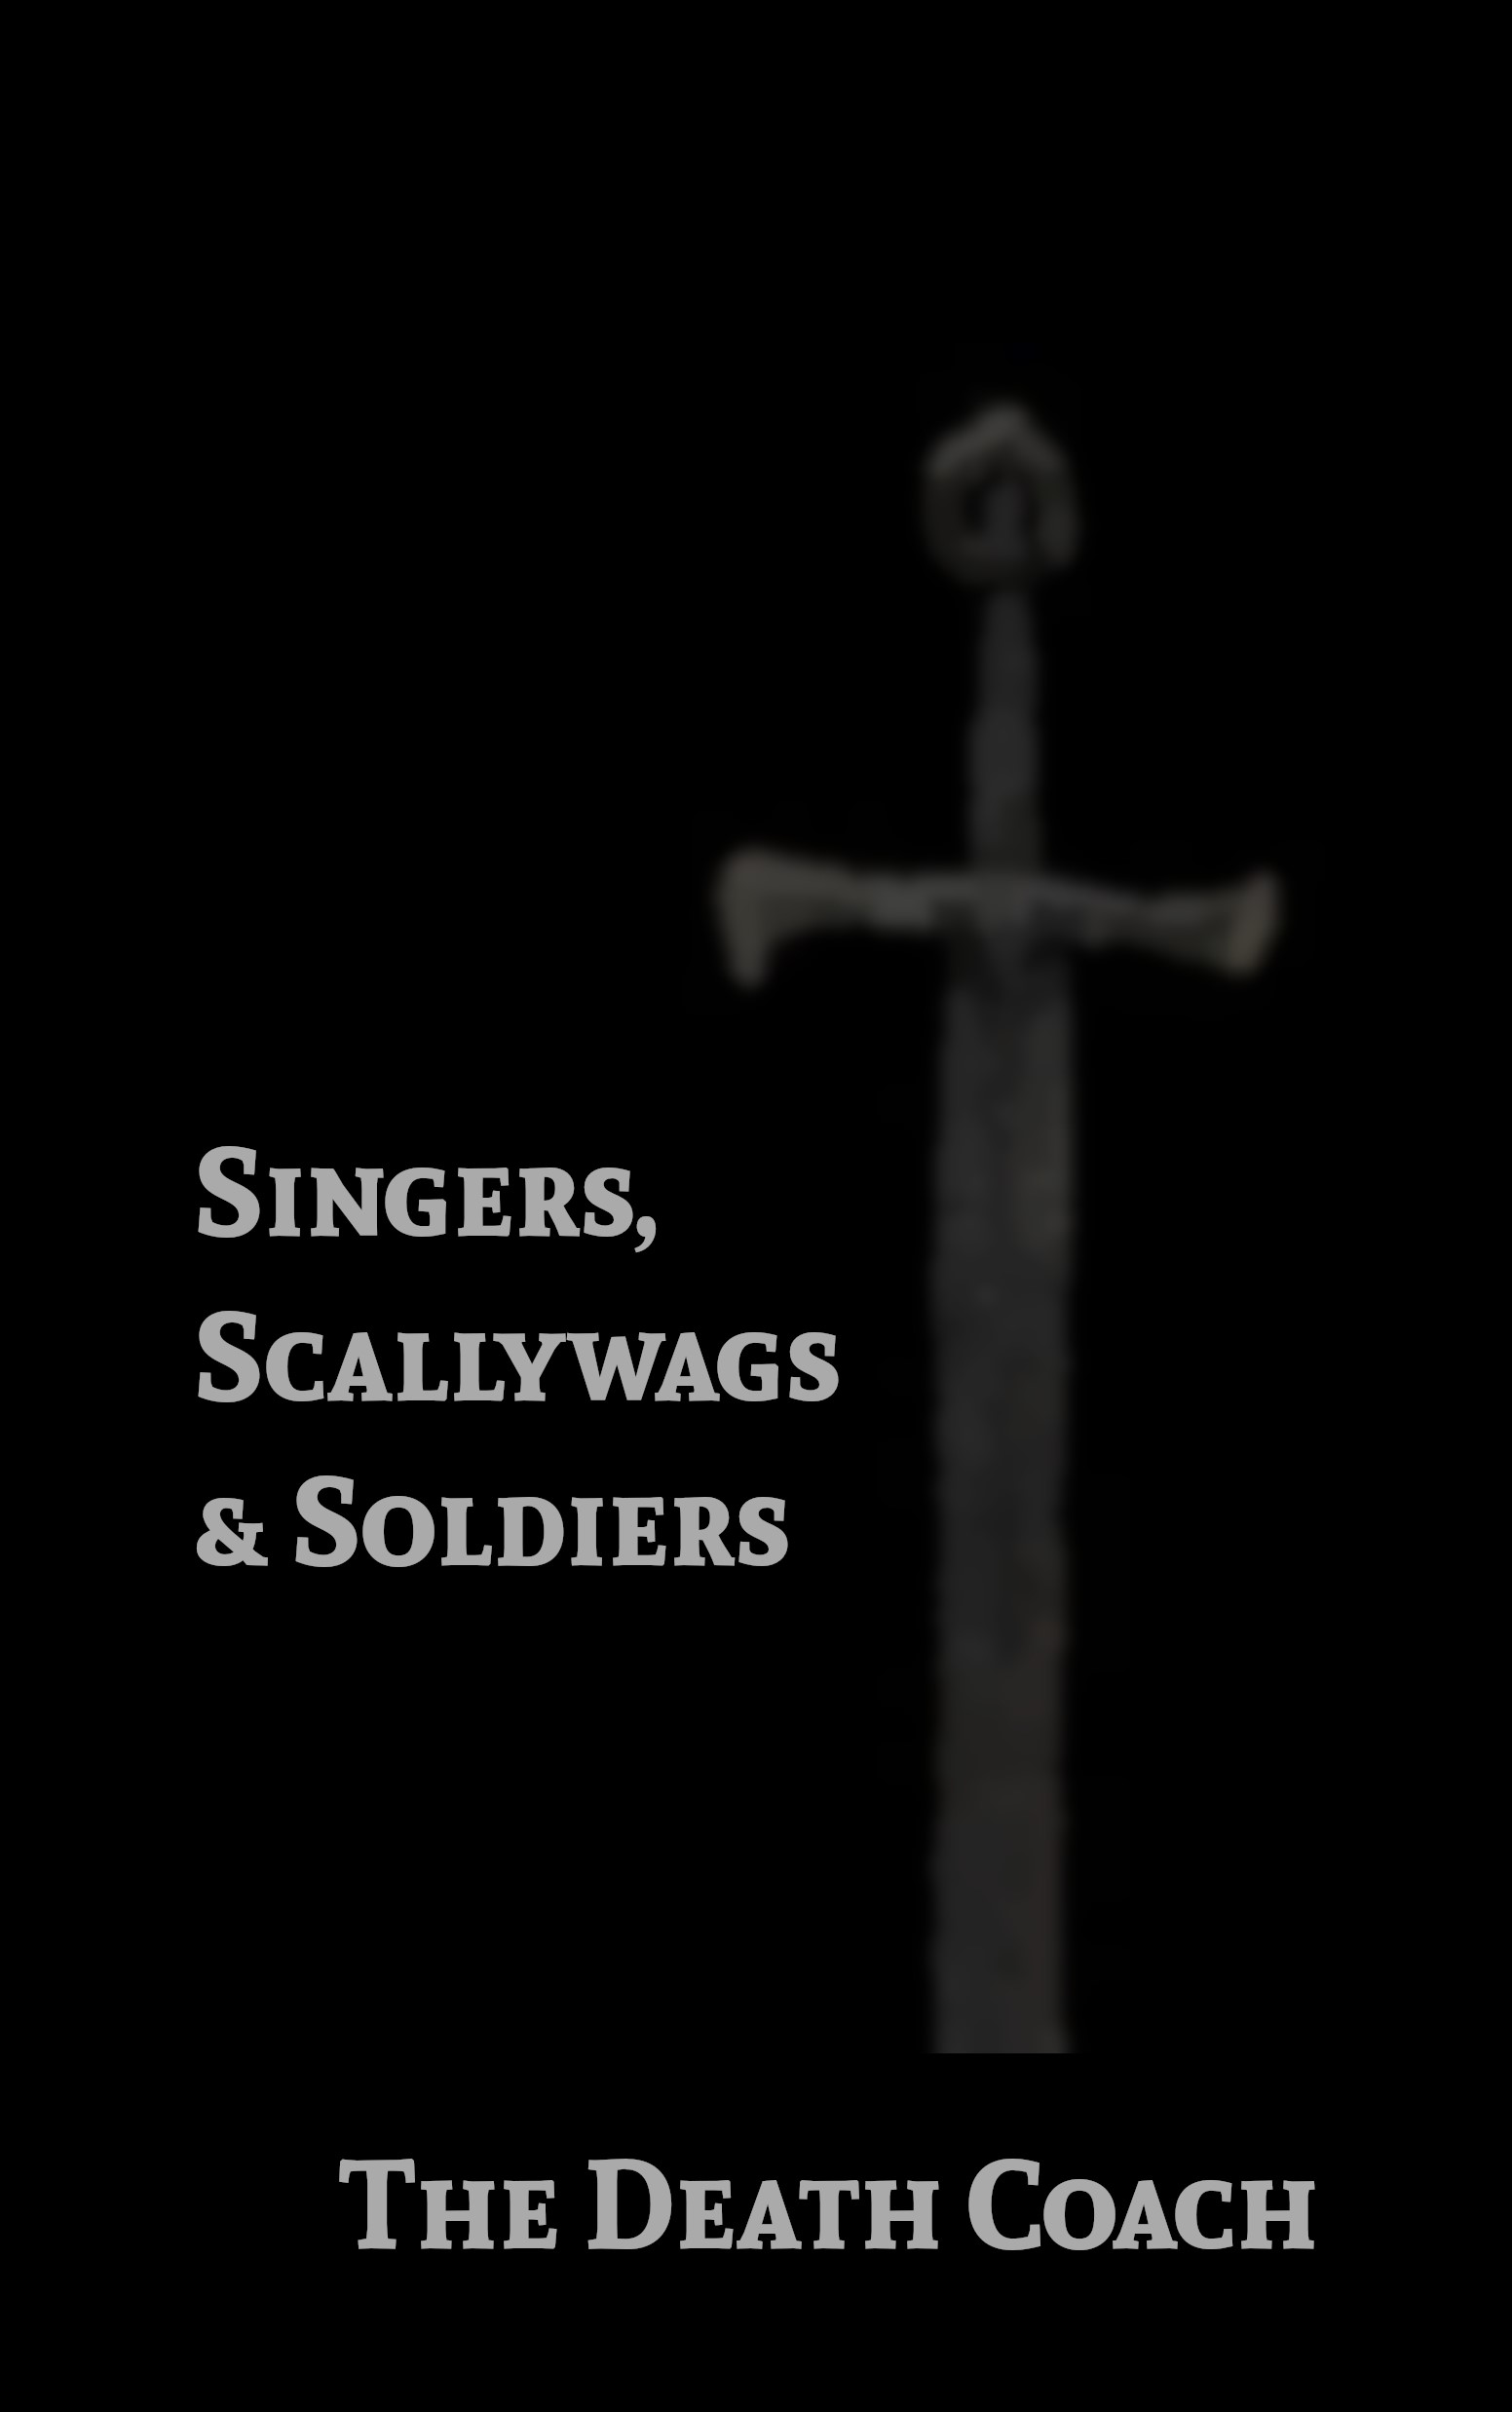 FREE: Singers, Scallywags and Soldiers by The Death Coach